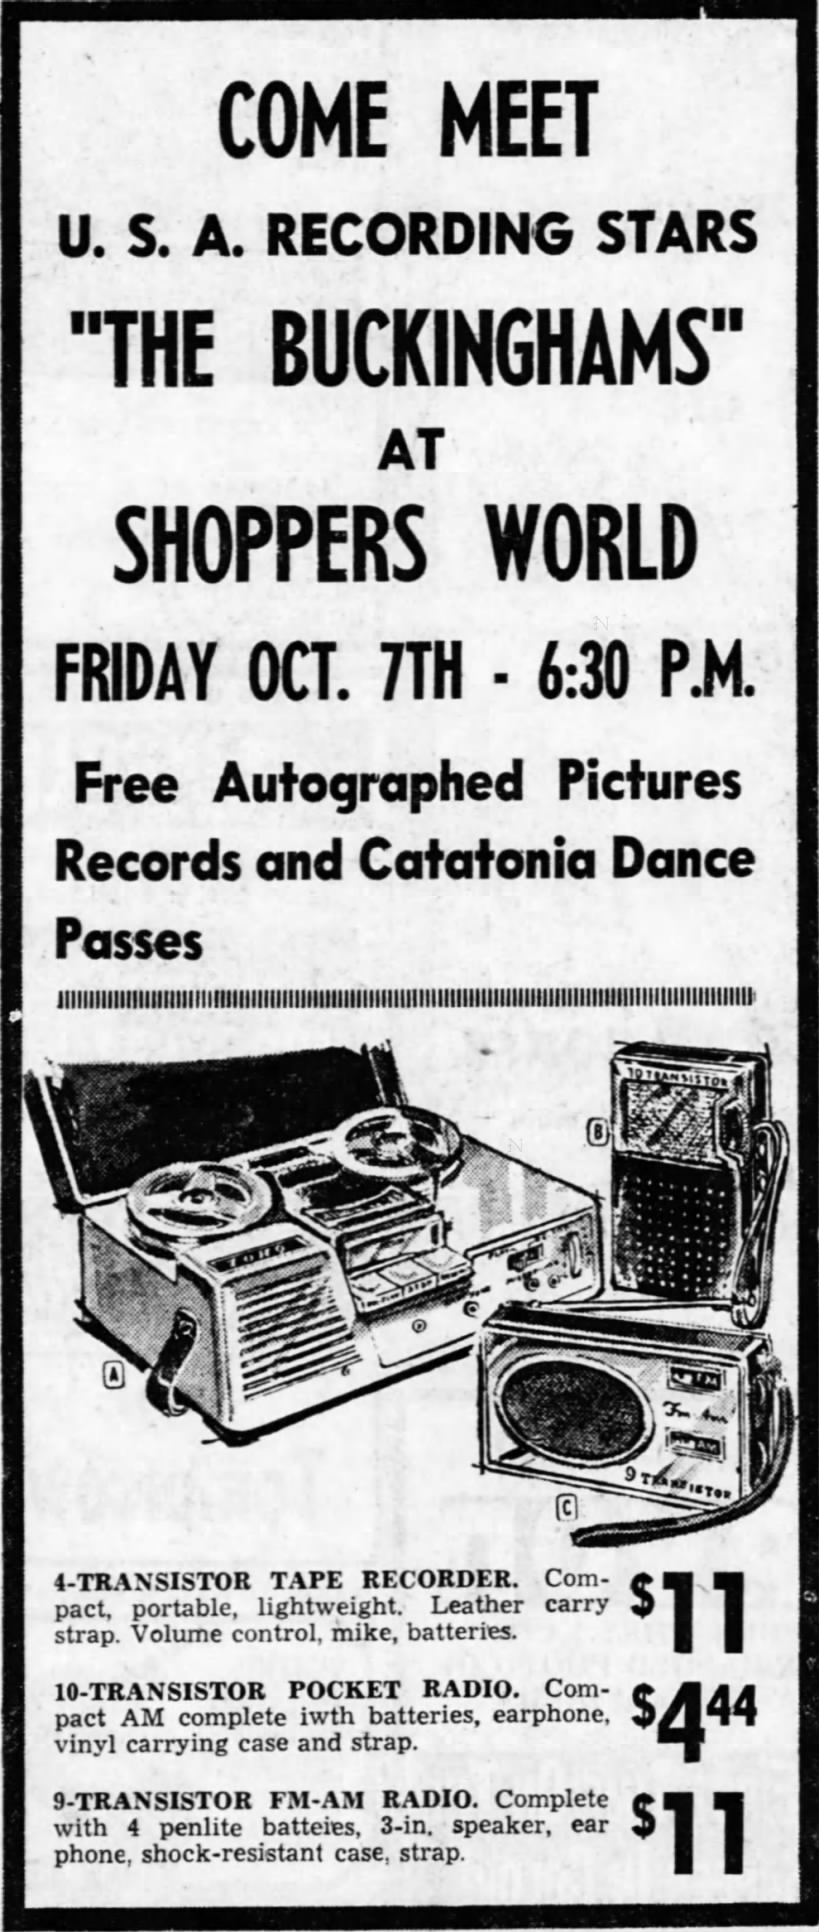 1966-Oct-06 Shoppers World Ad with Buckinghams & Catatonia dance passes